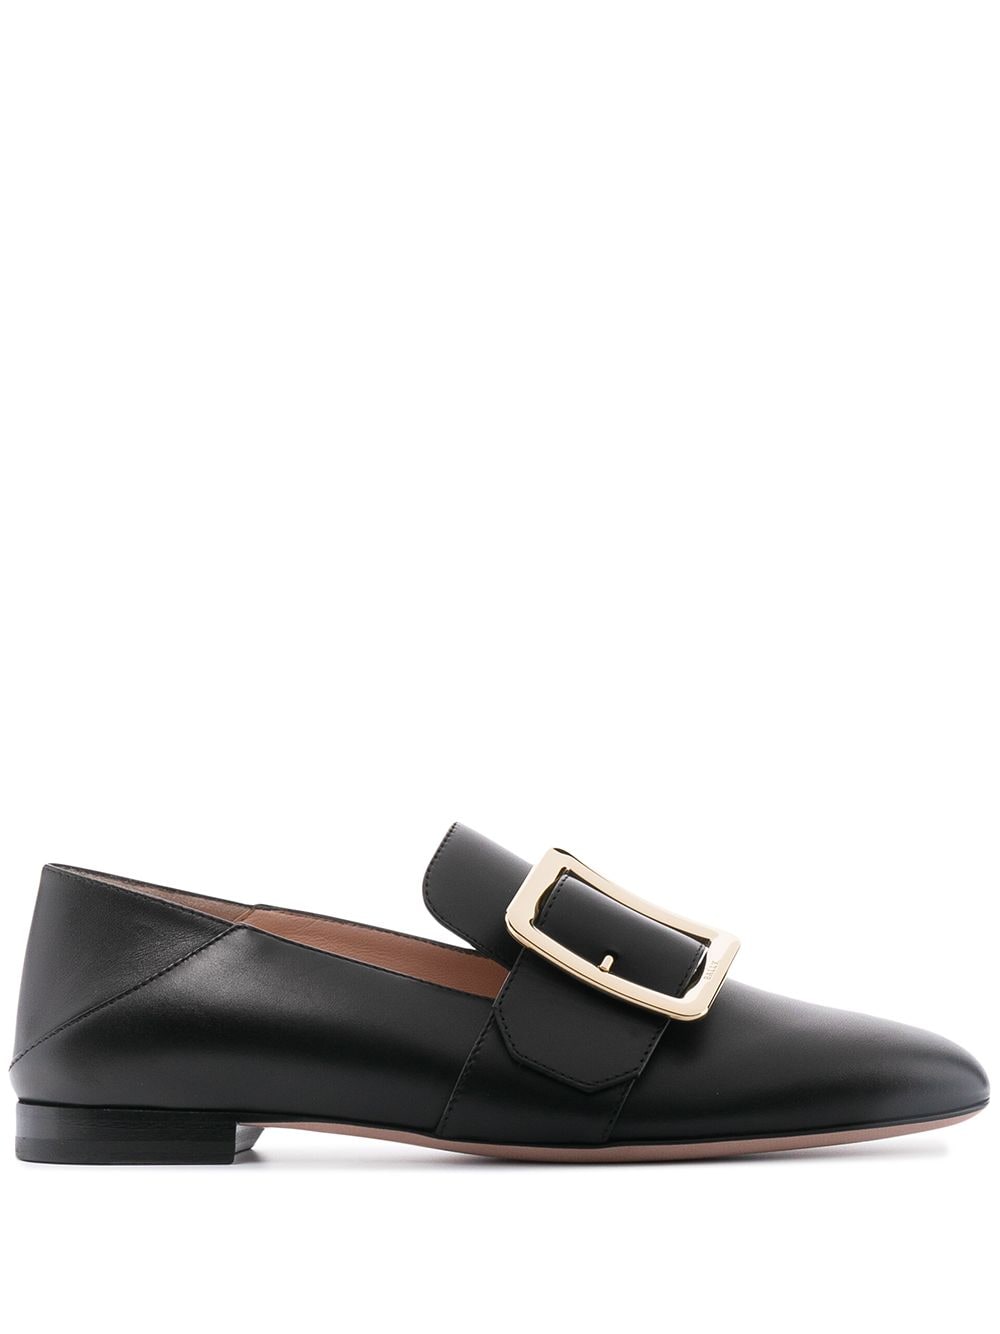 Bally Janelle square buckle loafers - Black von Bally